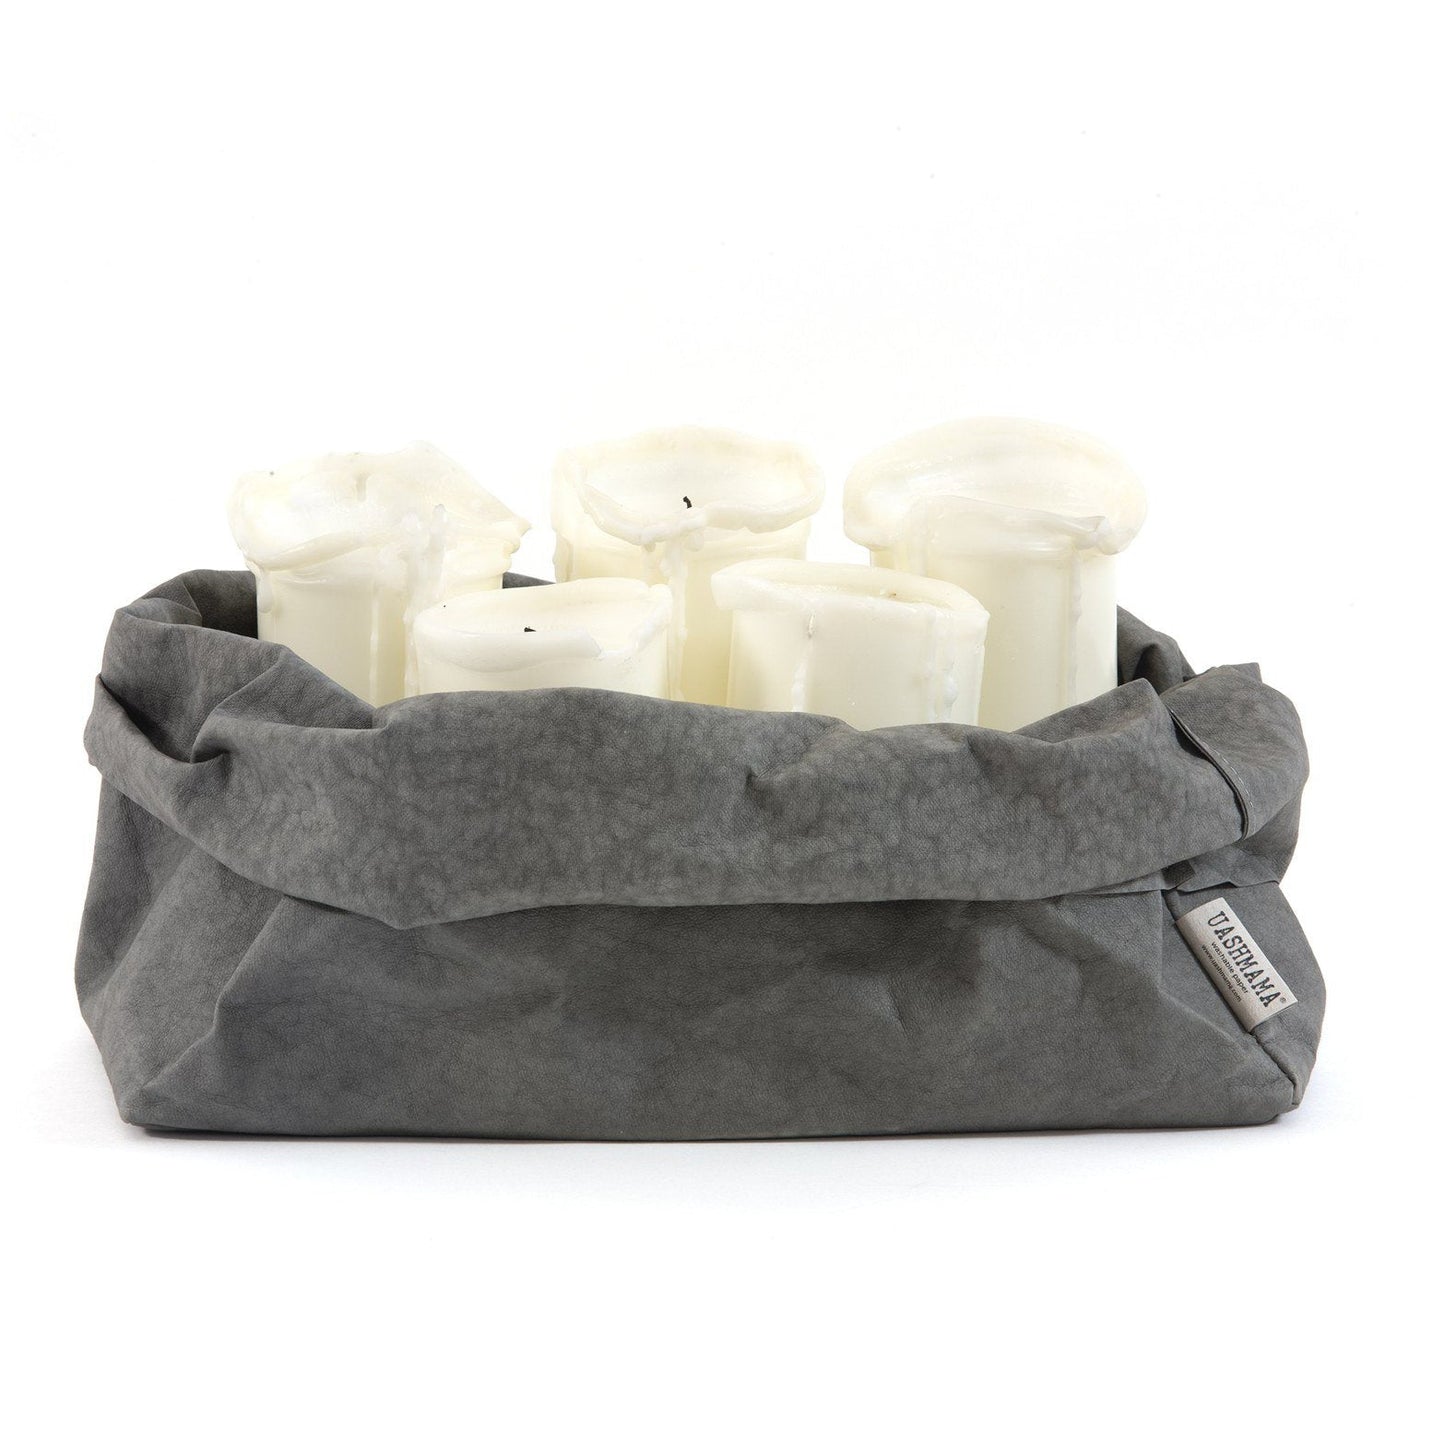 A dark grey oblong washable paper tray is shown. The top is rolled down and the UASHMAMA logo label is shown on the bottom right corner of the bag. The tray is shown holding 5 white pillar candles.